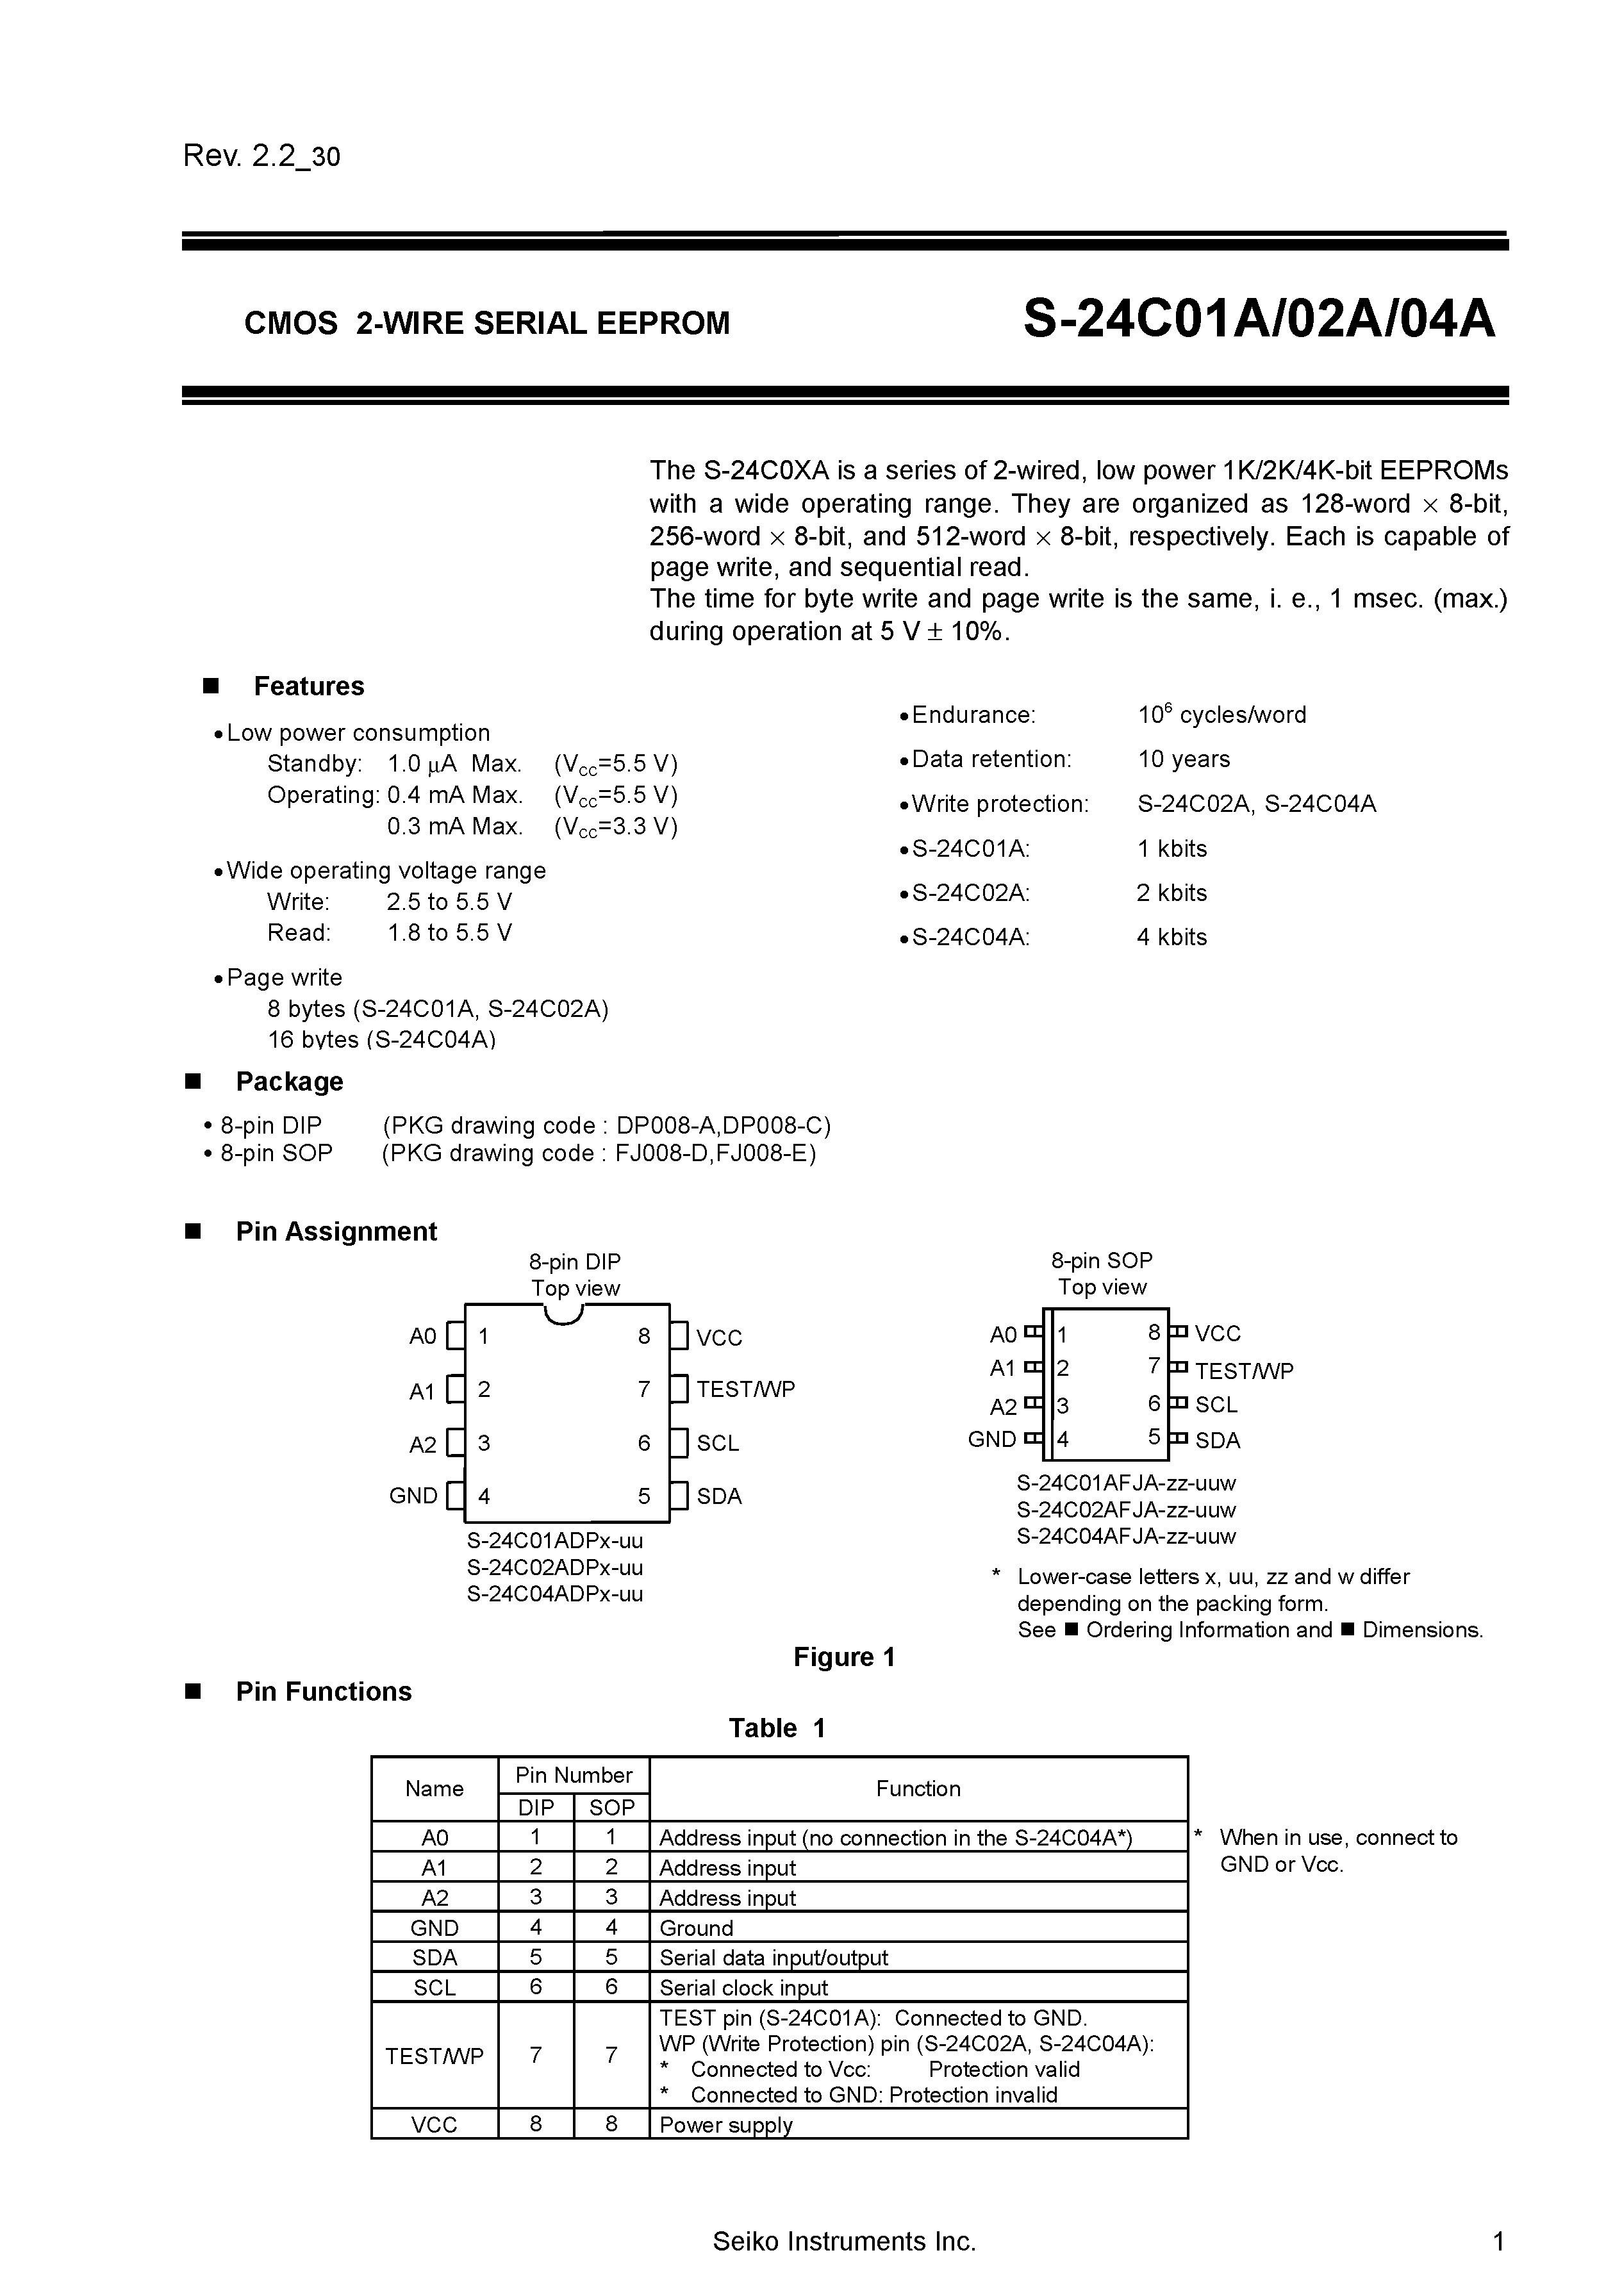 Datasheet S-24C04AFJA-11-S - CMOS 2-WIRE SERIAL EEPROM page 1